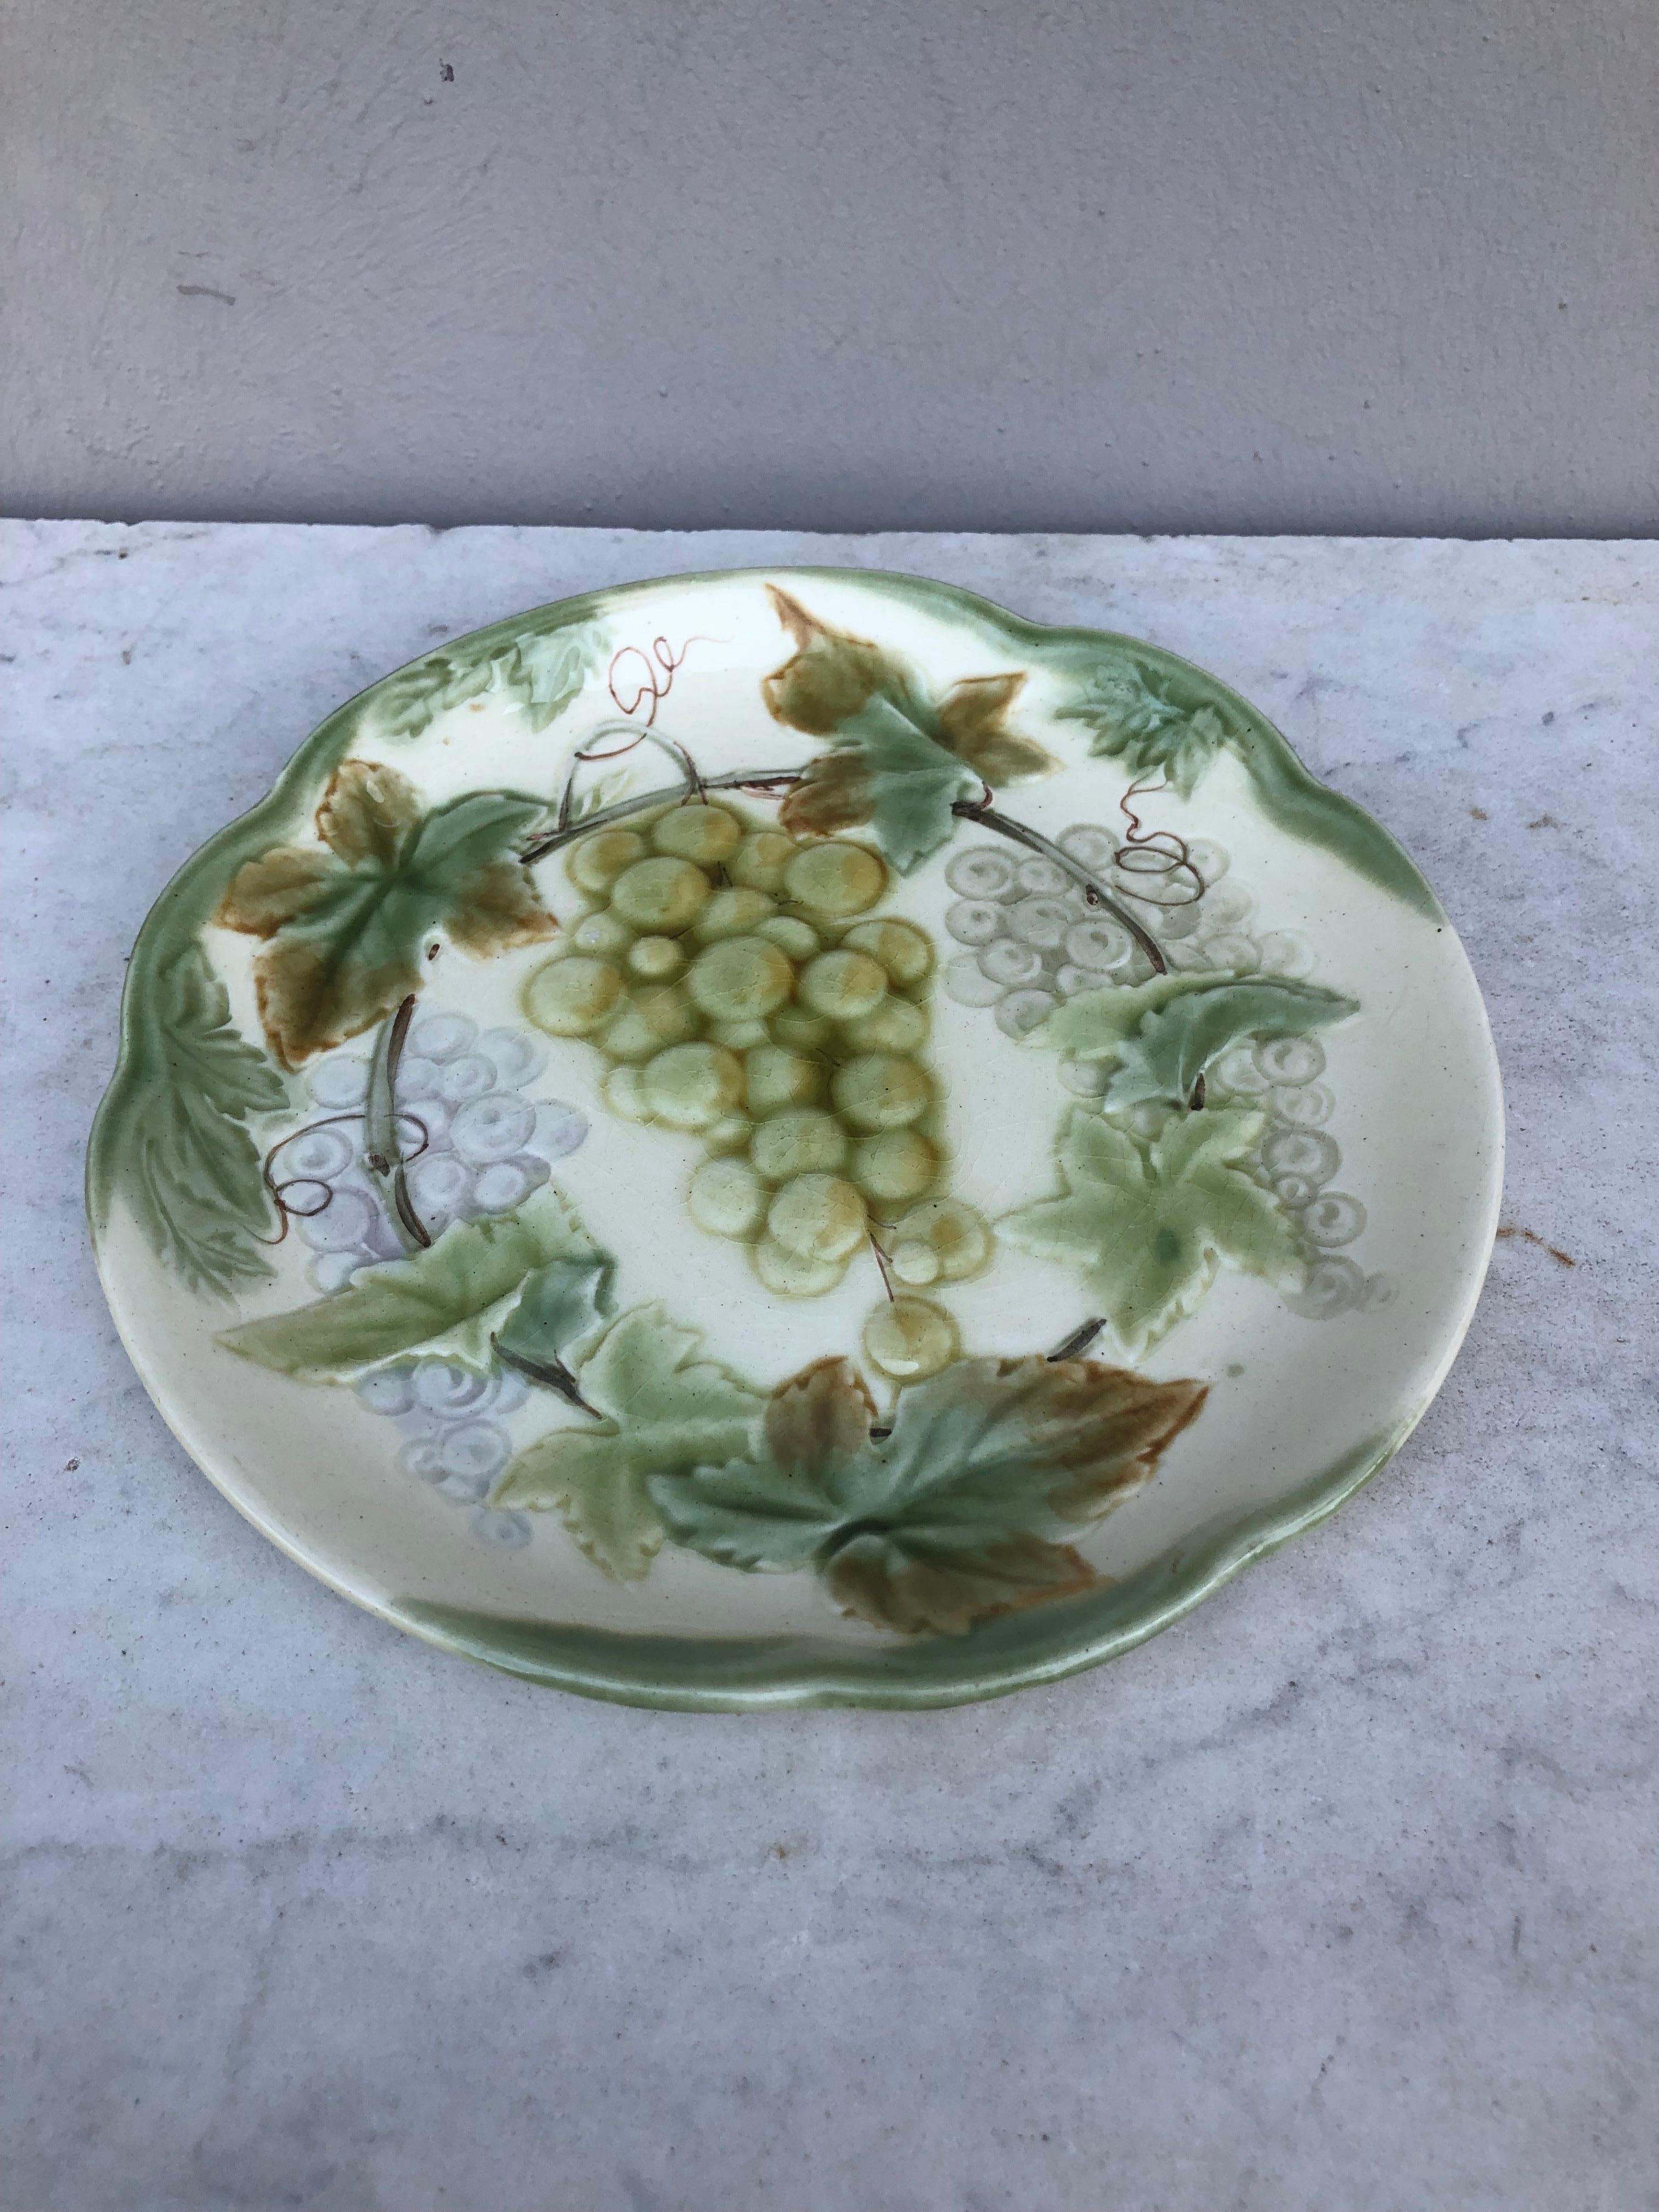 19th century Majolica Grapes plate signed Choisy Le Roi.
Made for Higgins & Setter New York.
The Higgins & Seiter Company of New York City began selling decorations for the table, including rich-cut glass in 1887. By 1891 the firm was